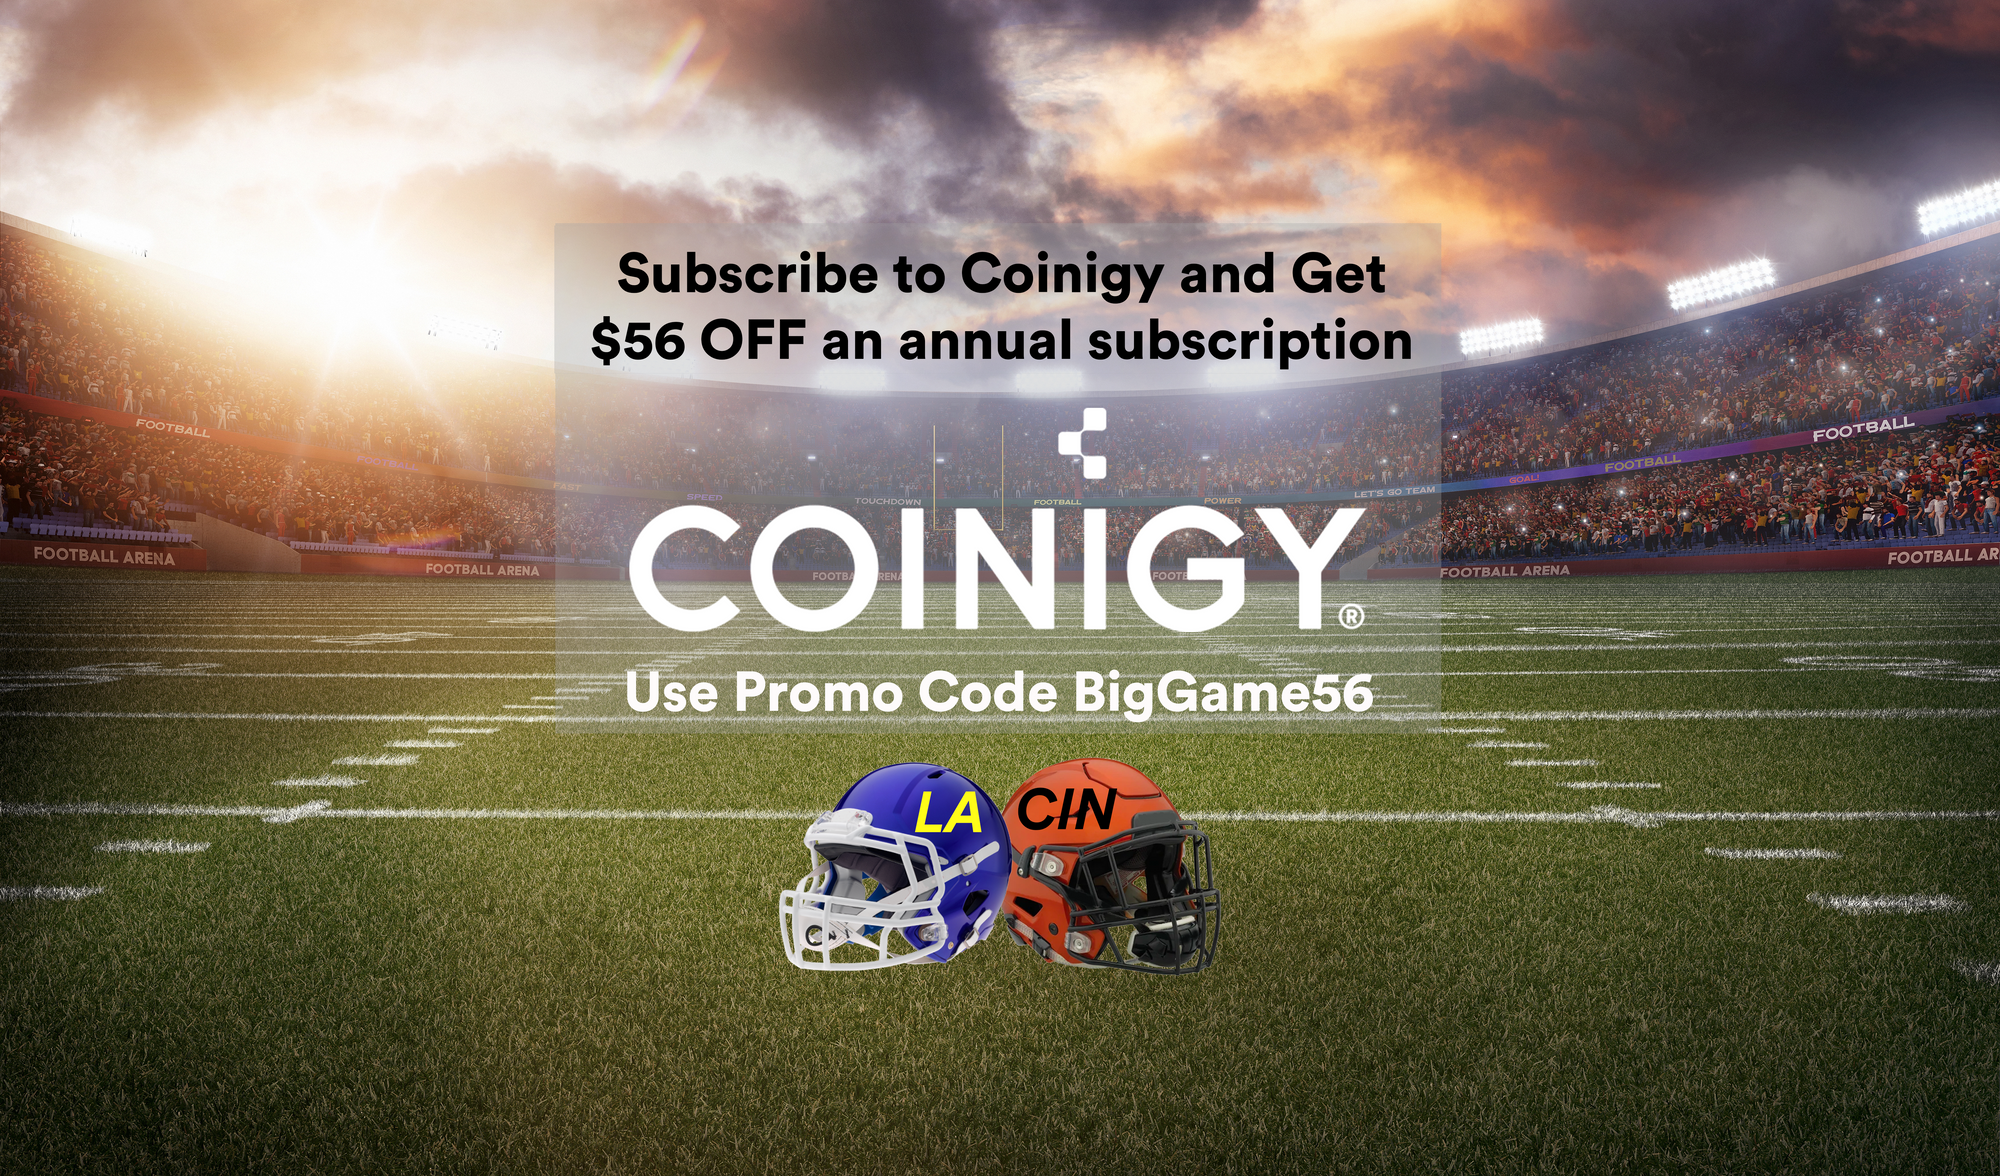 Sunday Football Special: Take $56 Off Annual Subscription